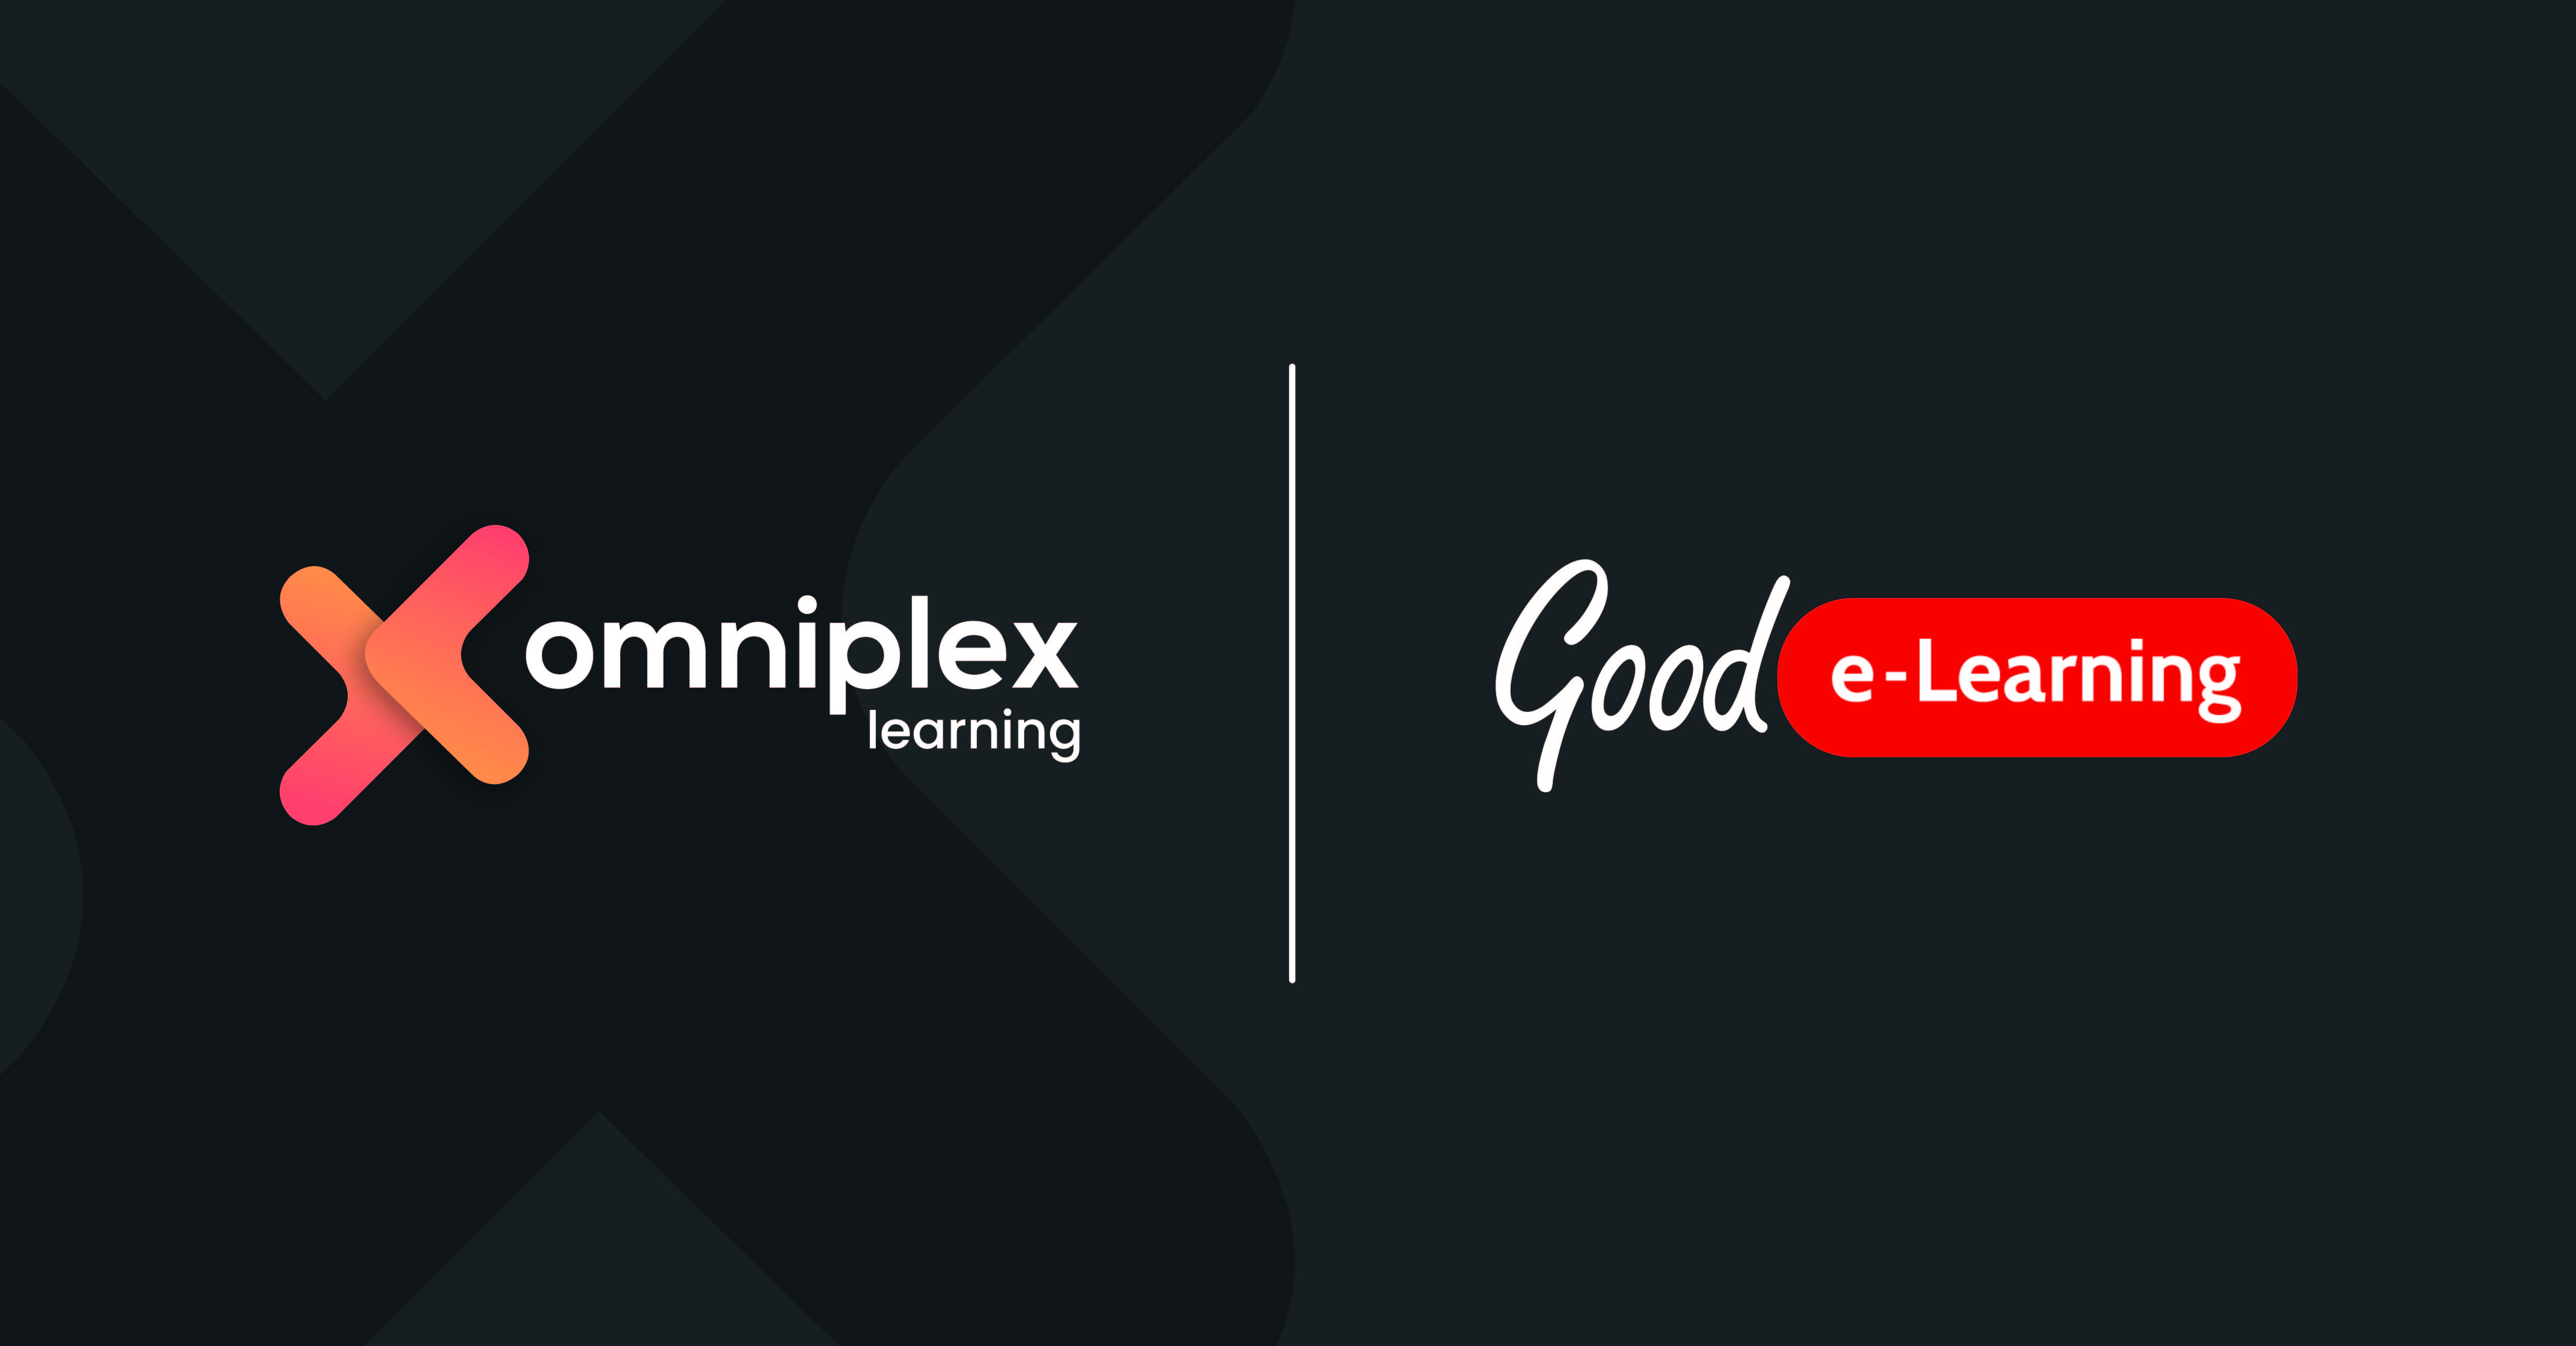 Omniplex Learning offers additional 80 industry qualifications after acquiring the business of Good e-Learning